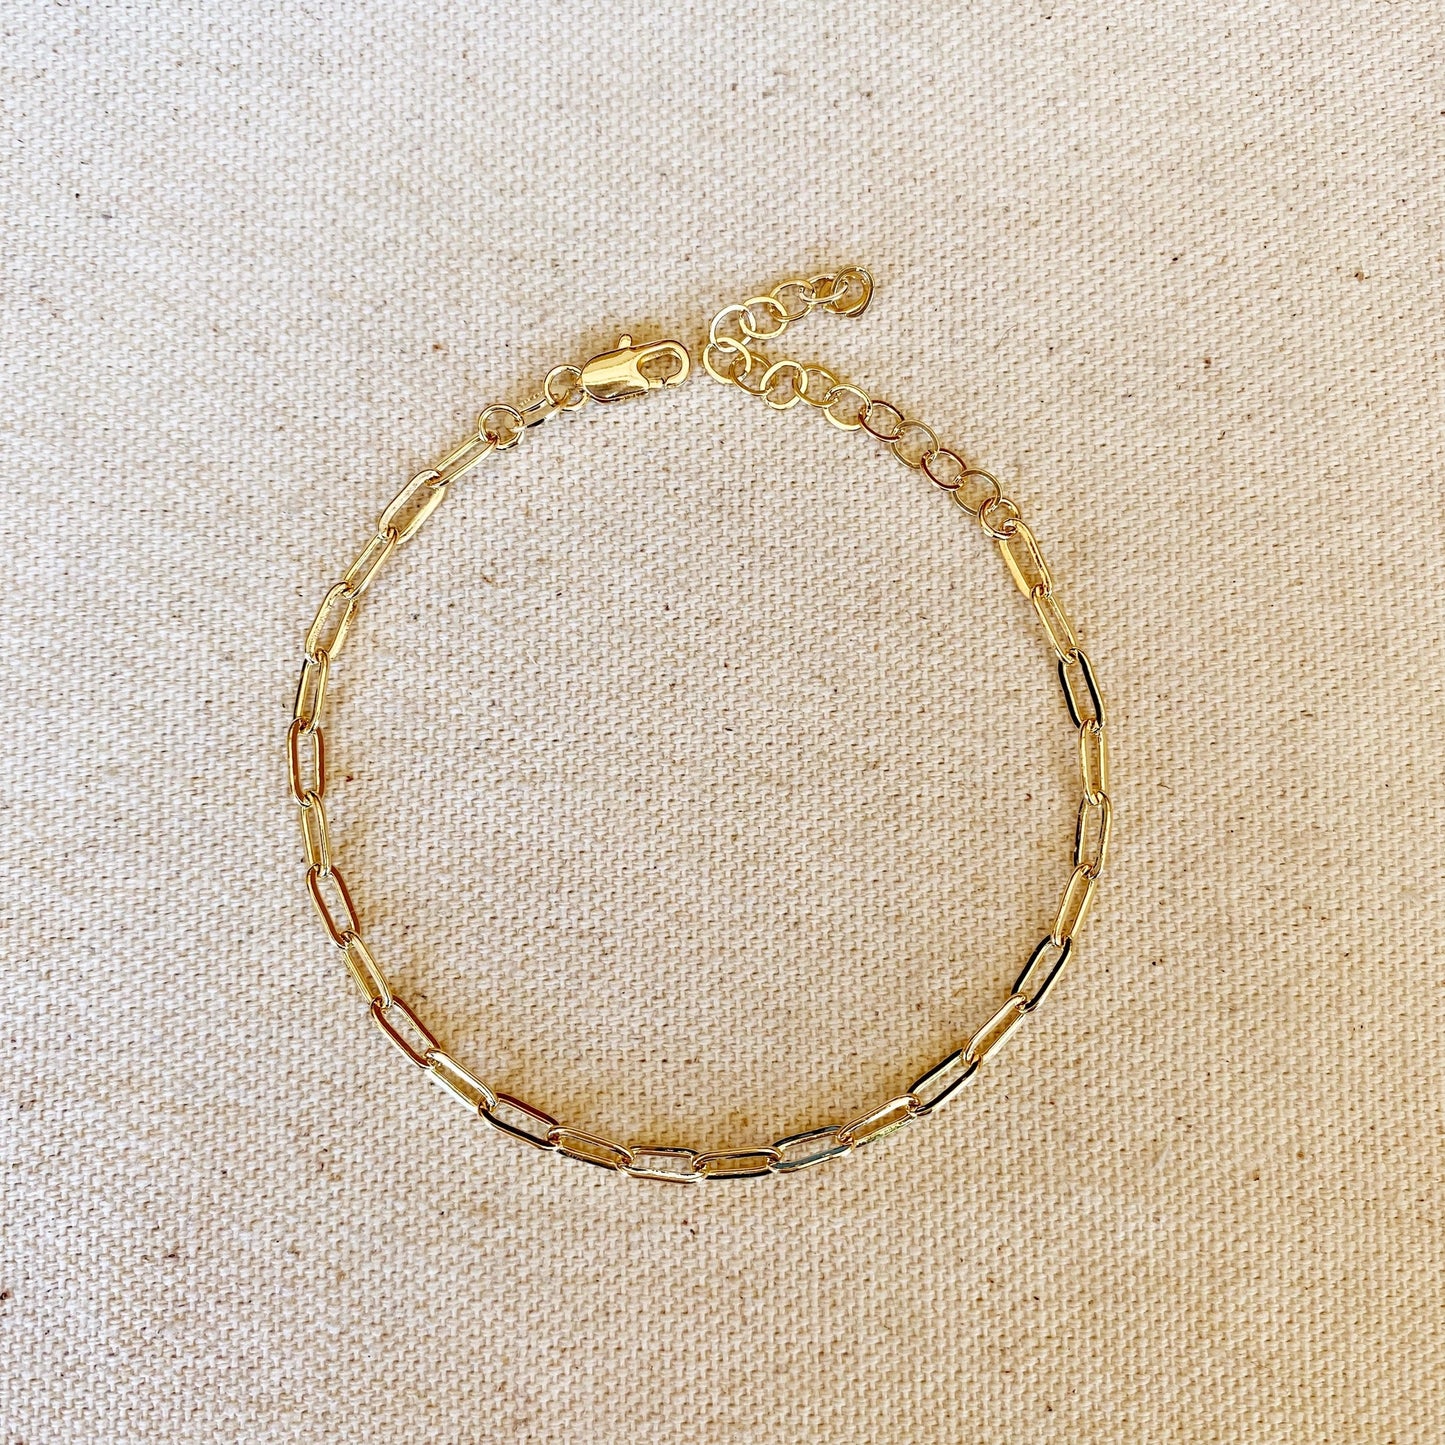 Gold Paperclip Chain Bracelet - 7 inches